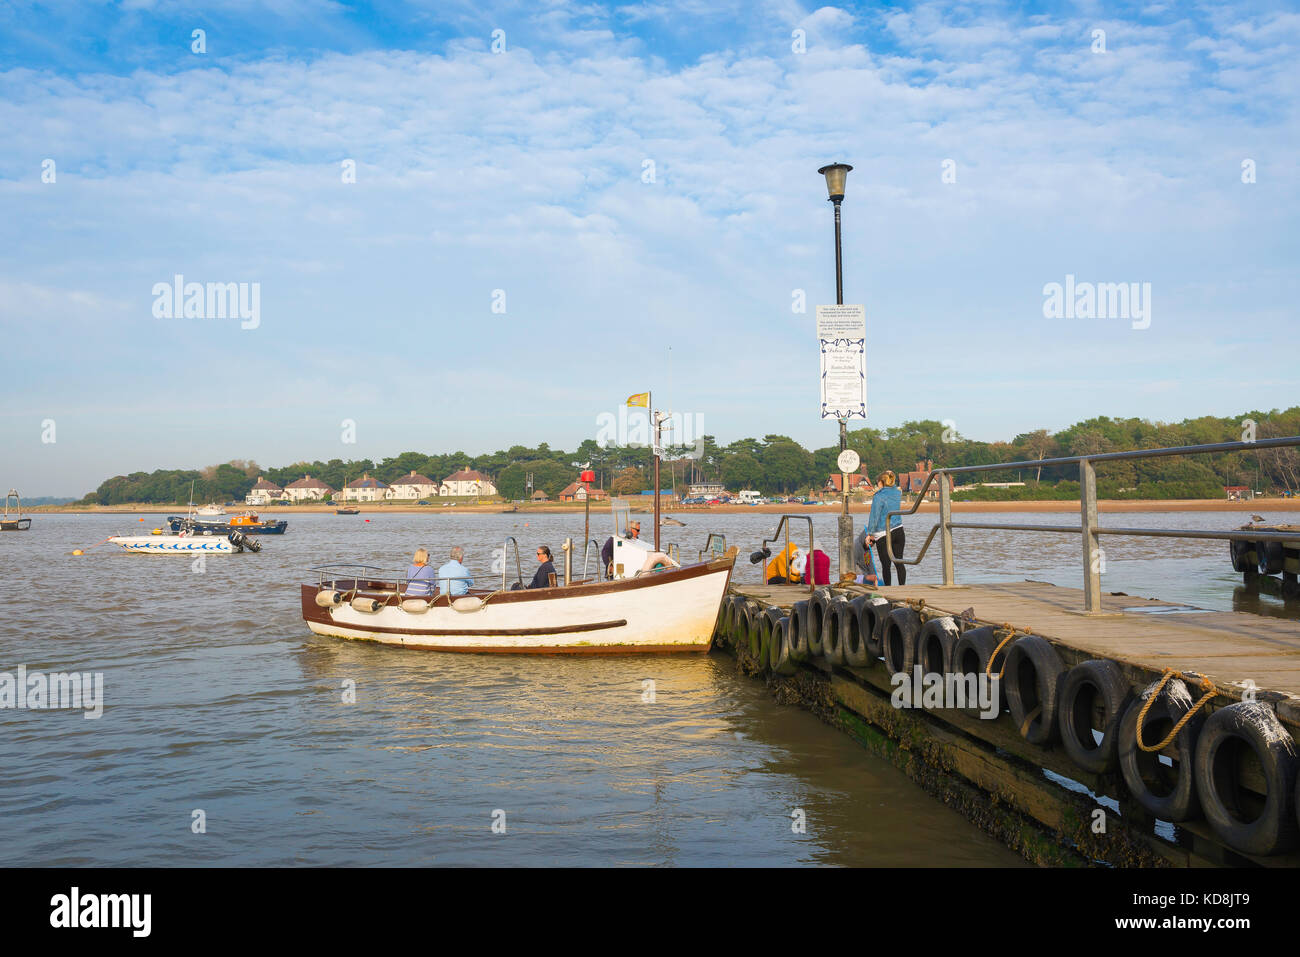 River Deben Suffolk, view of the Felixstowe Ferry boat arriving at the jetty on the Felixstowe side of the River Deben, UK. Stock Photo